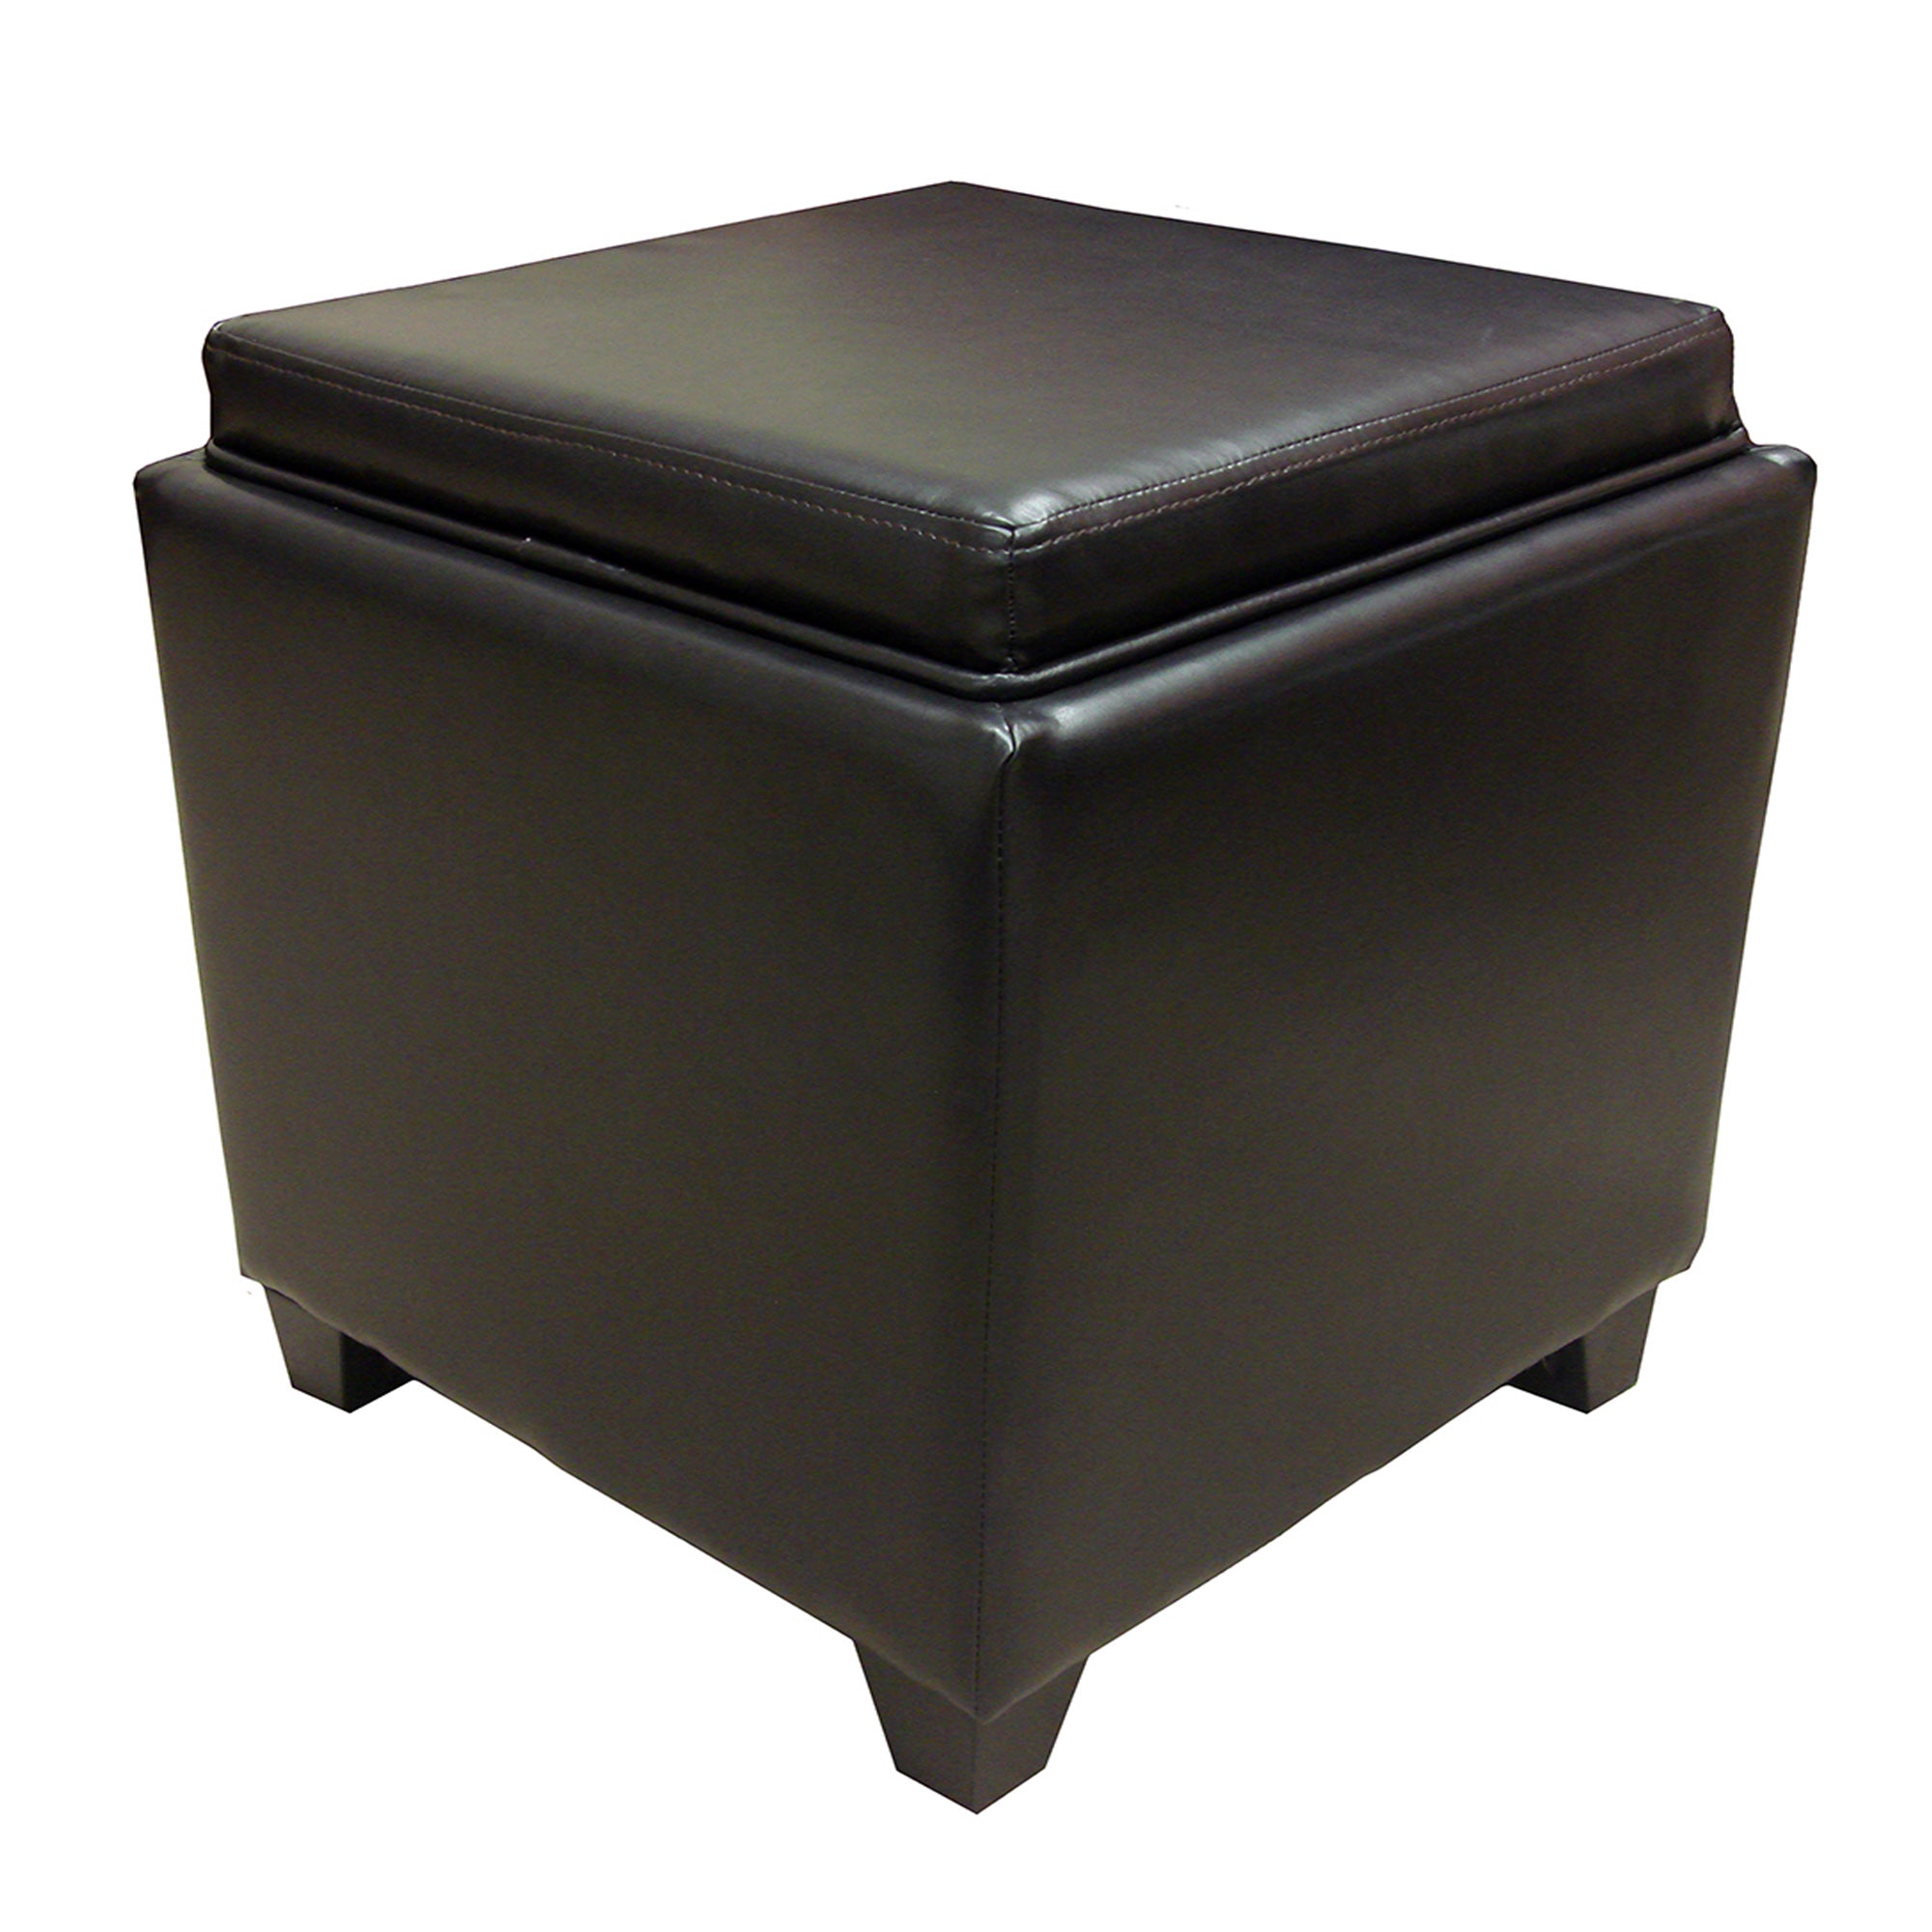 Armen Living Lc530otlebr Rainbow Contemporary Storage Ottoman With Tray In Brown Bonded Leather